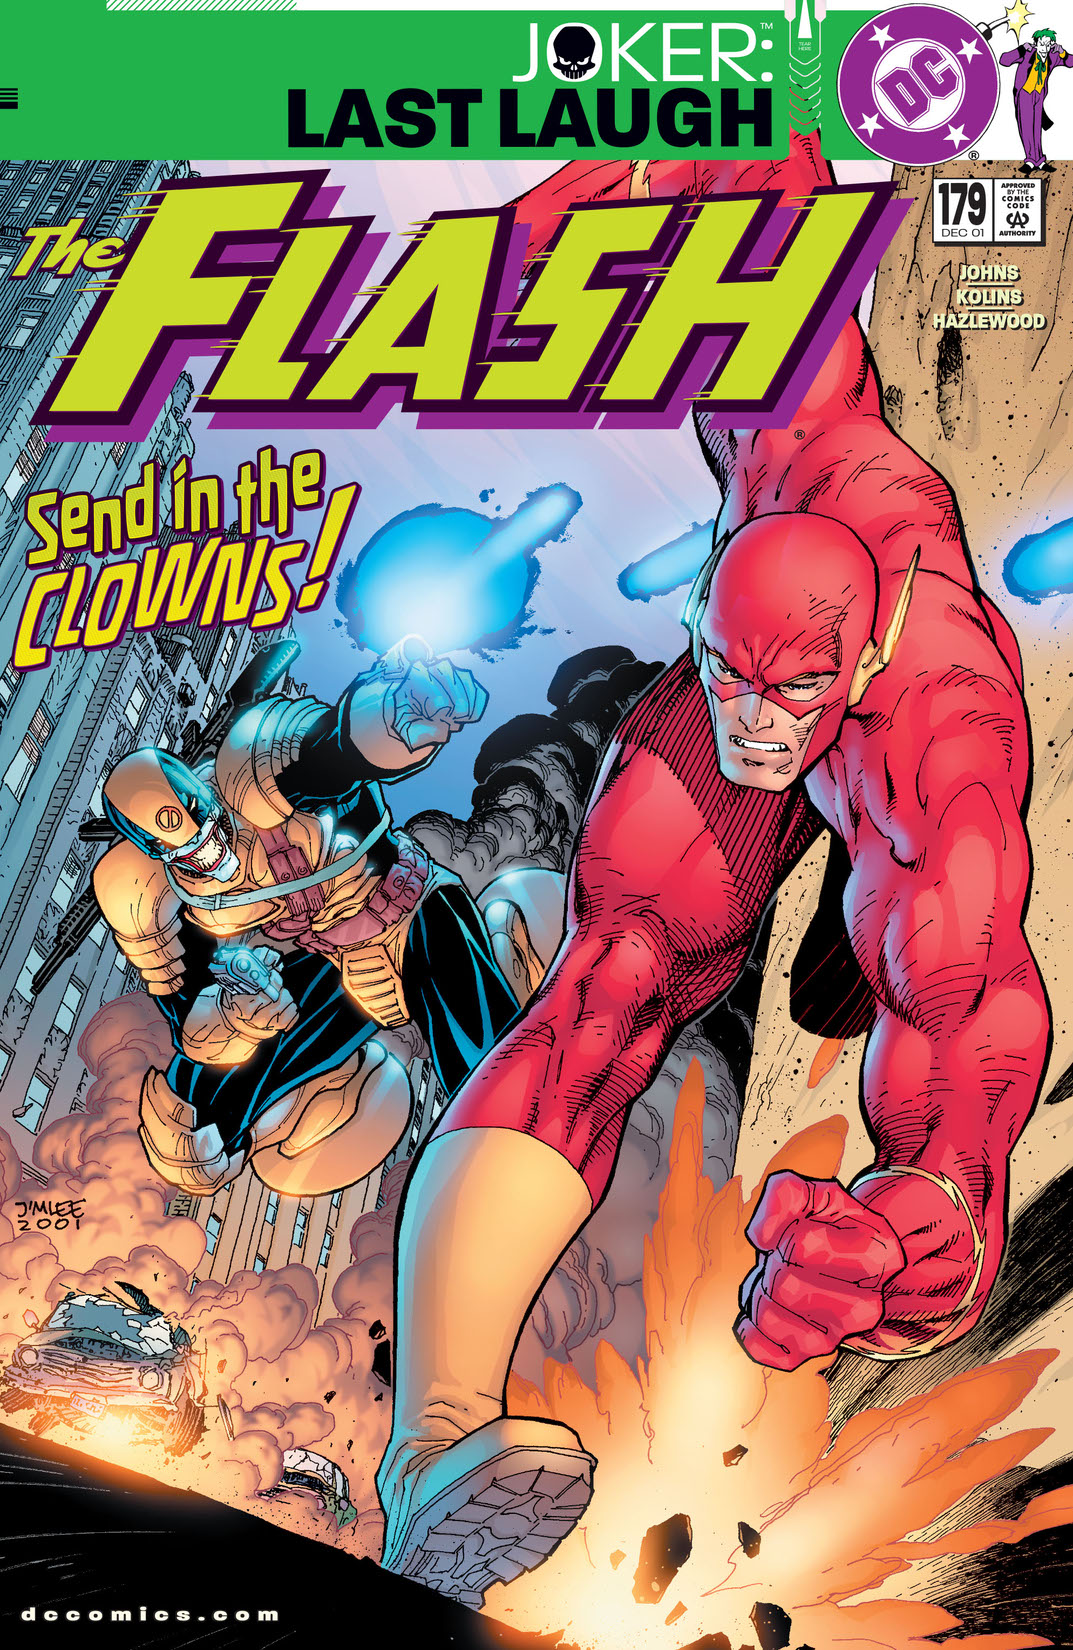 The Flash (1987-2009) #179 preview images